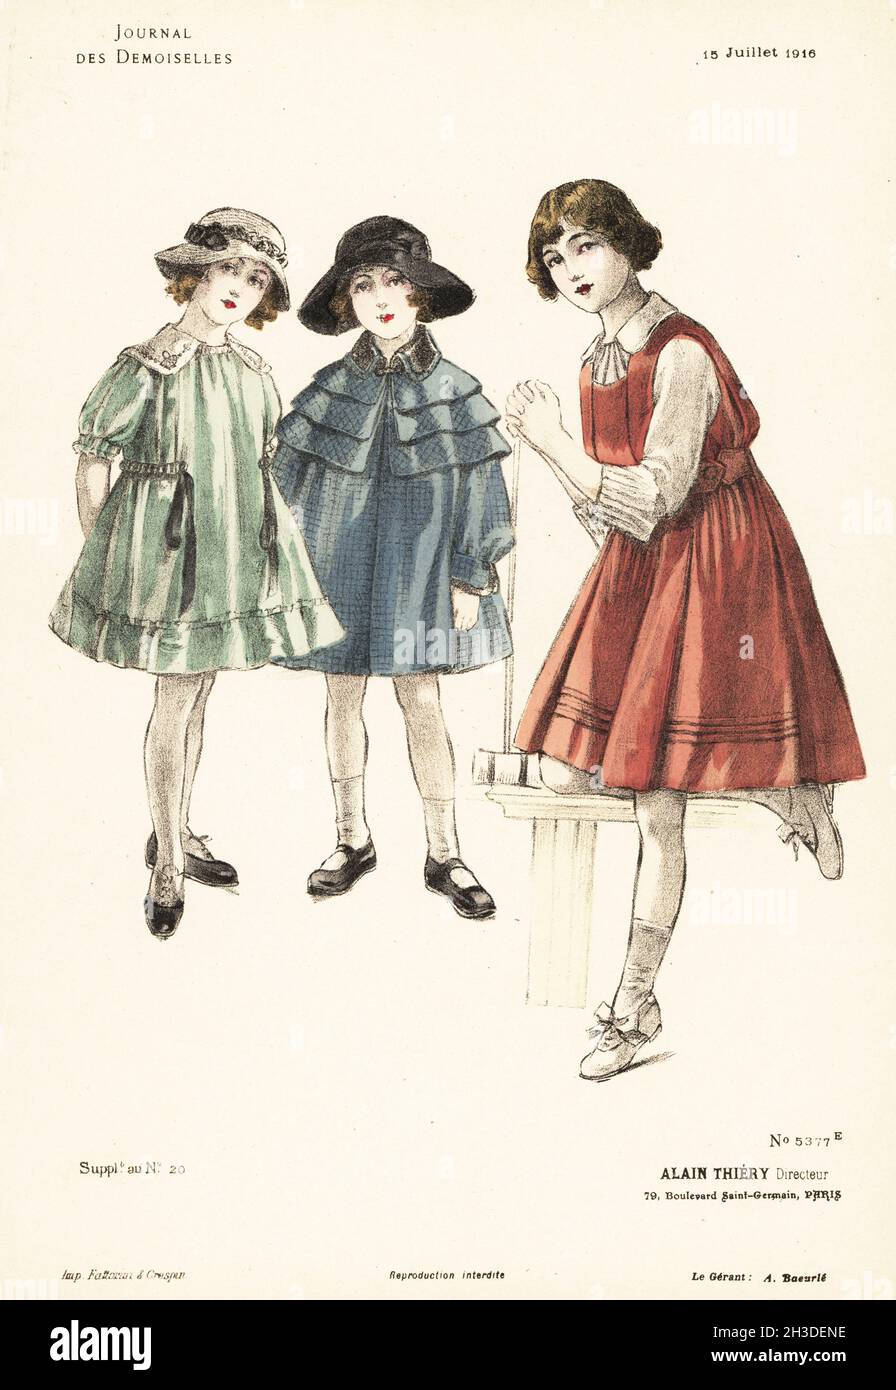 Young girls playing croquet, WWI. They wear short pinafore dresses, cloche caps, ankle socks and shoes. One in a short carrick cape or coachman's coat. Handcoloured lithograph by Fattorini & Crespin from Alain Thiery’s fashion magazine Journal des Demoiselles, 79 Boulevard Saint-Germain, Paris, France, July 15, 1916. Stock Photo